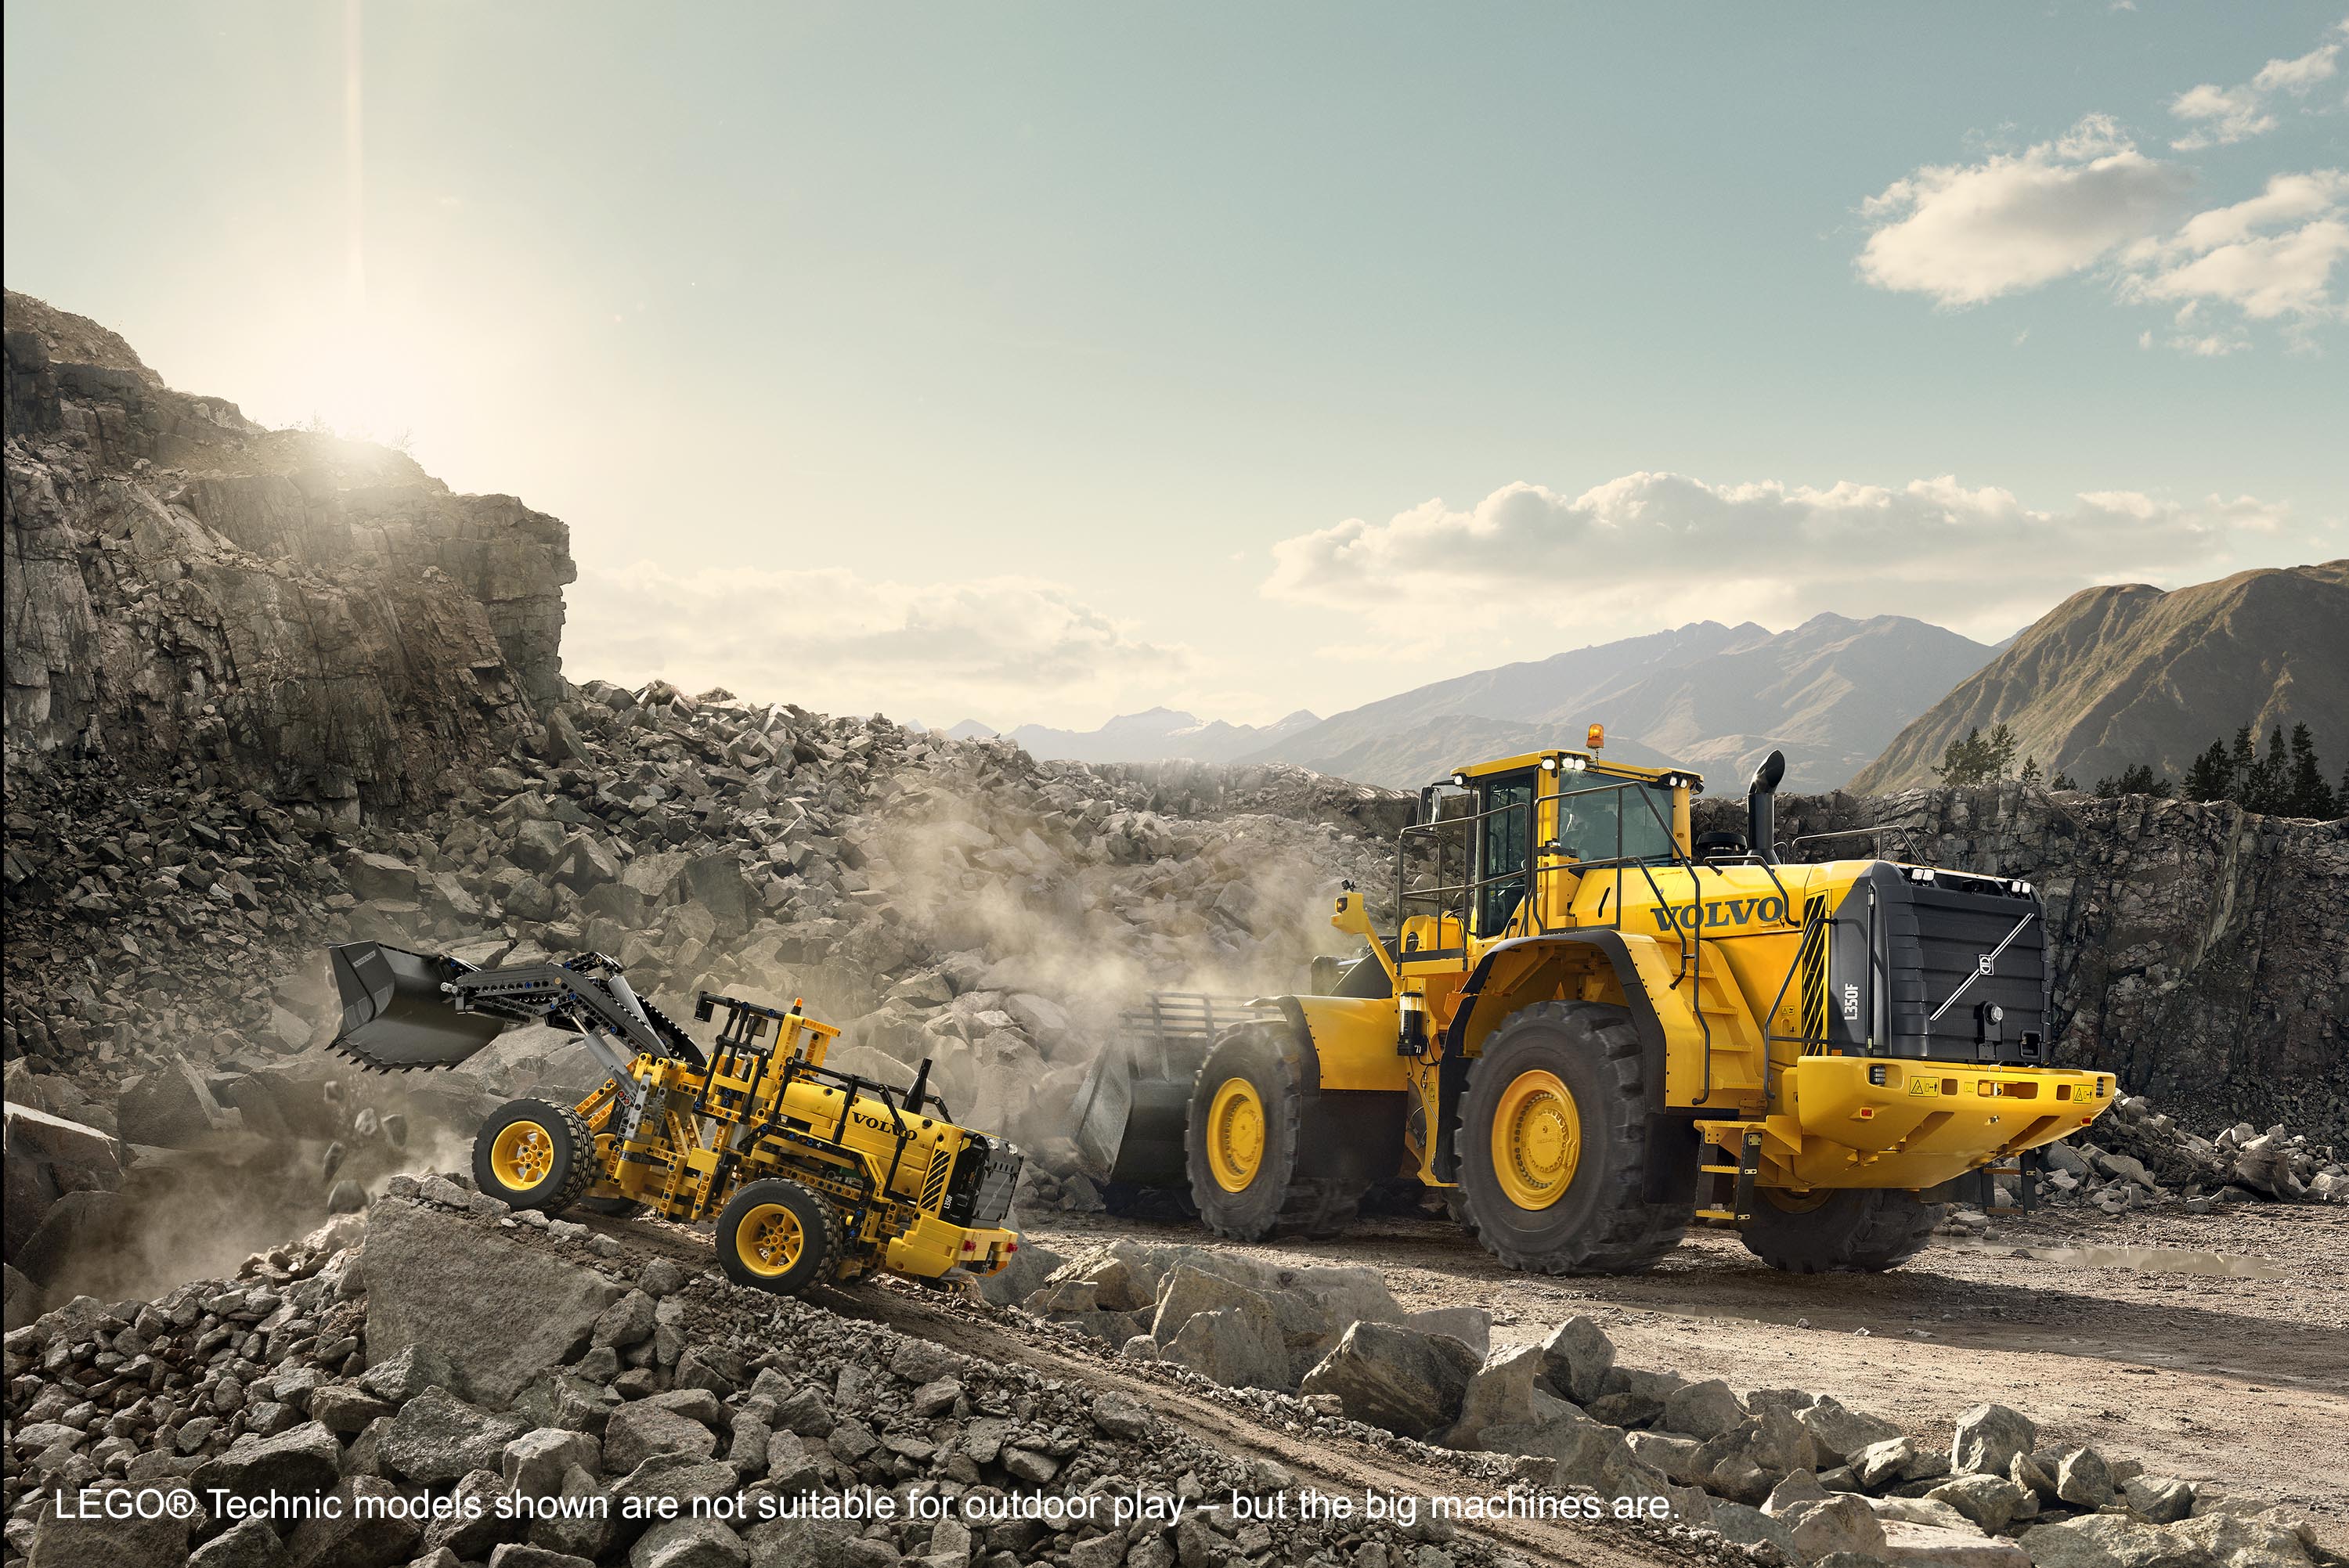 Lego Technic And Volvo Partner For The First Time To